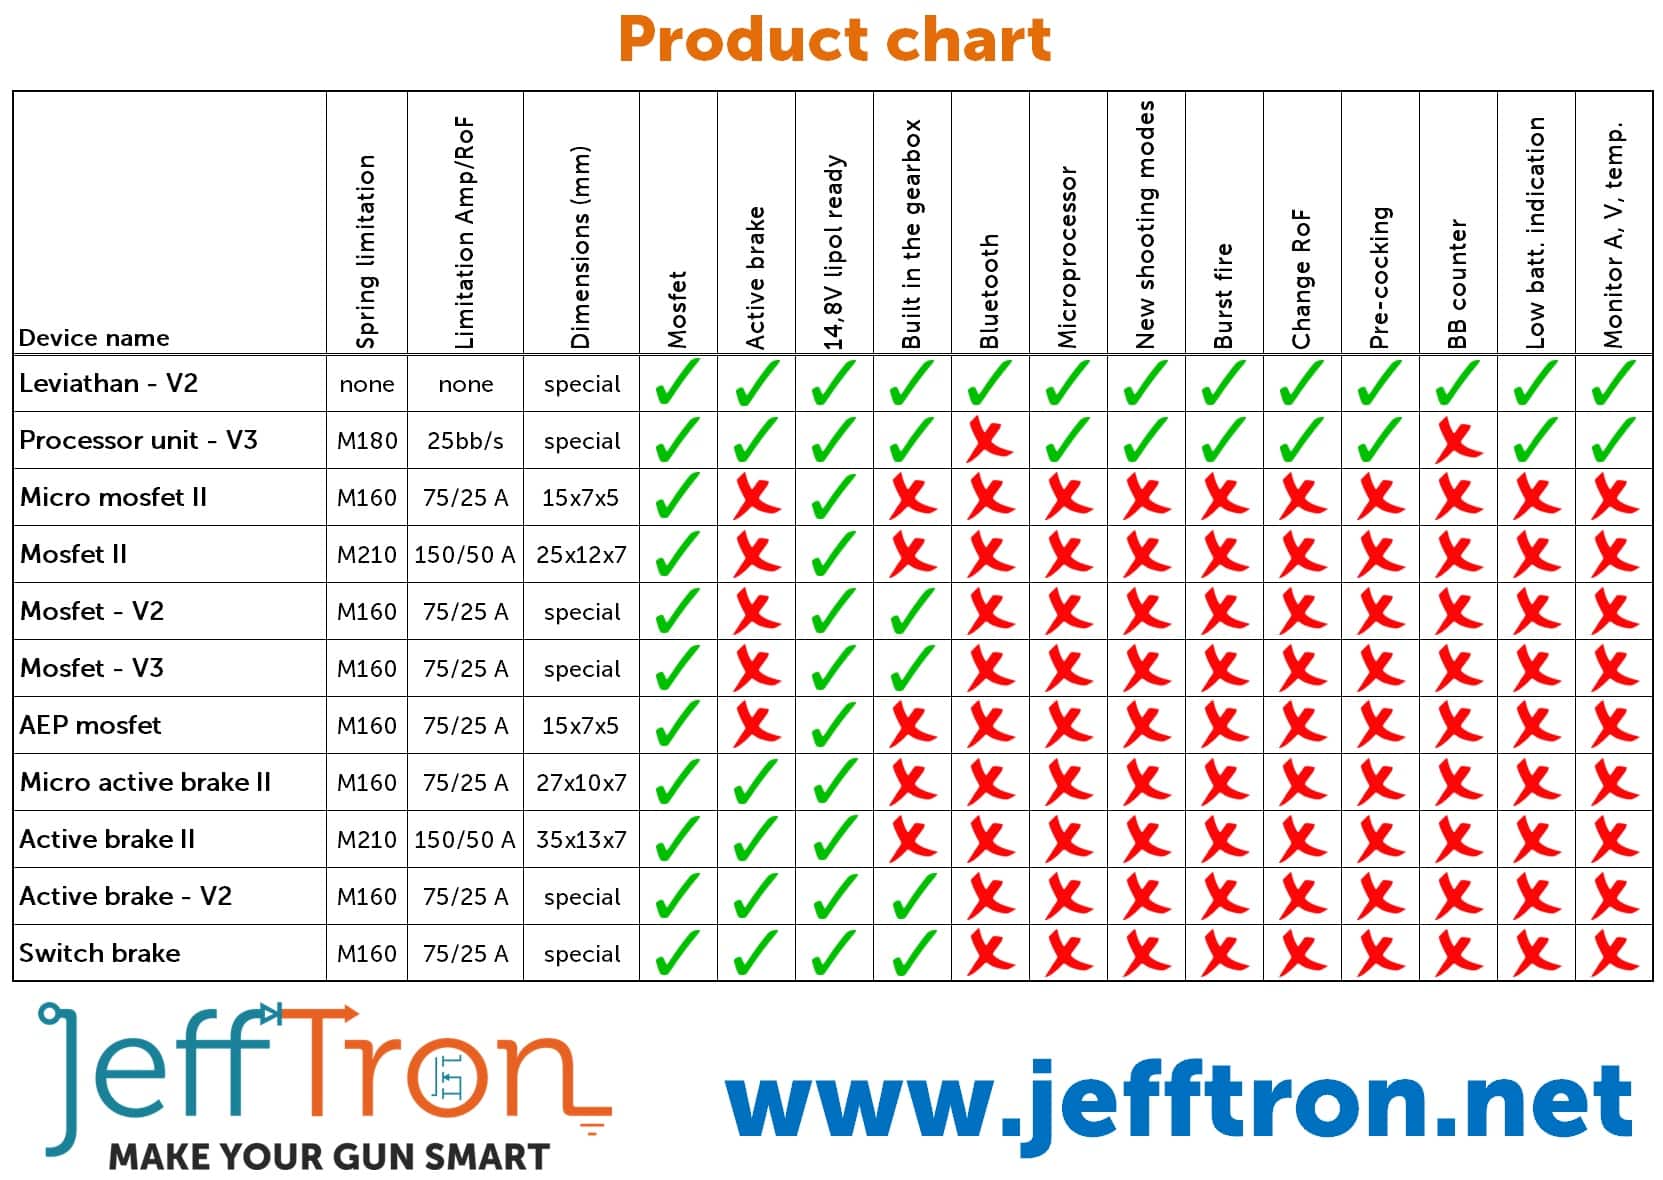 Jefftron Micro mosfet II with wiring